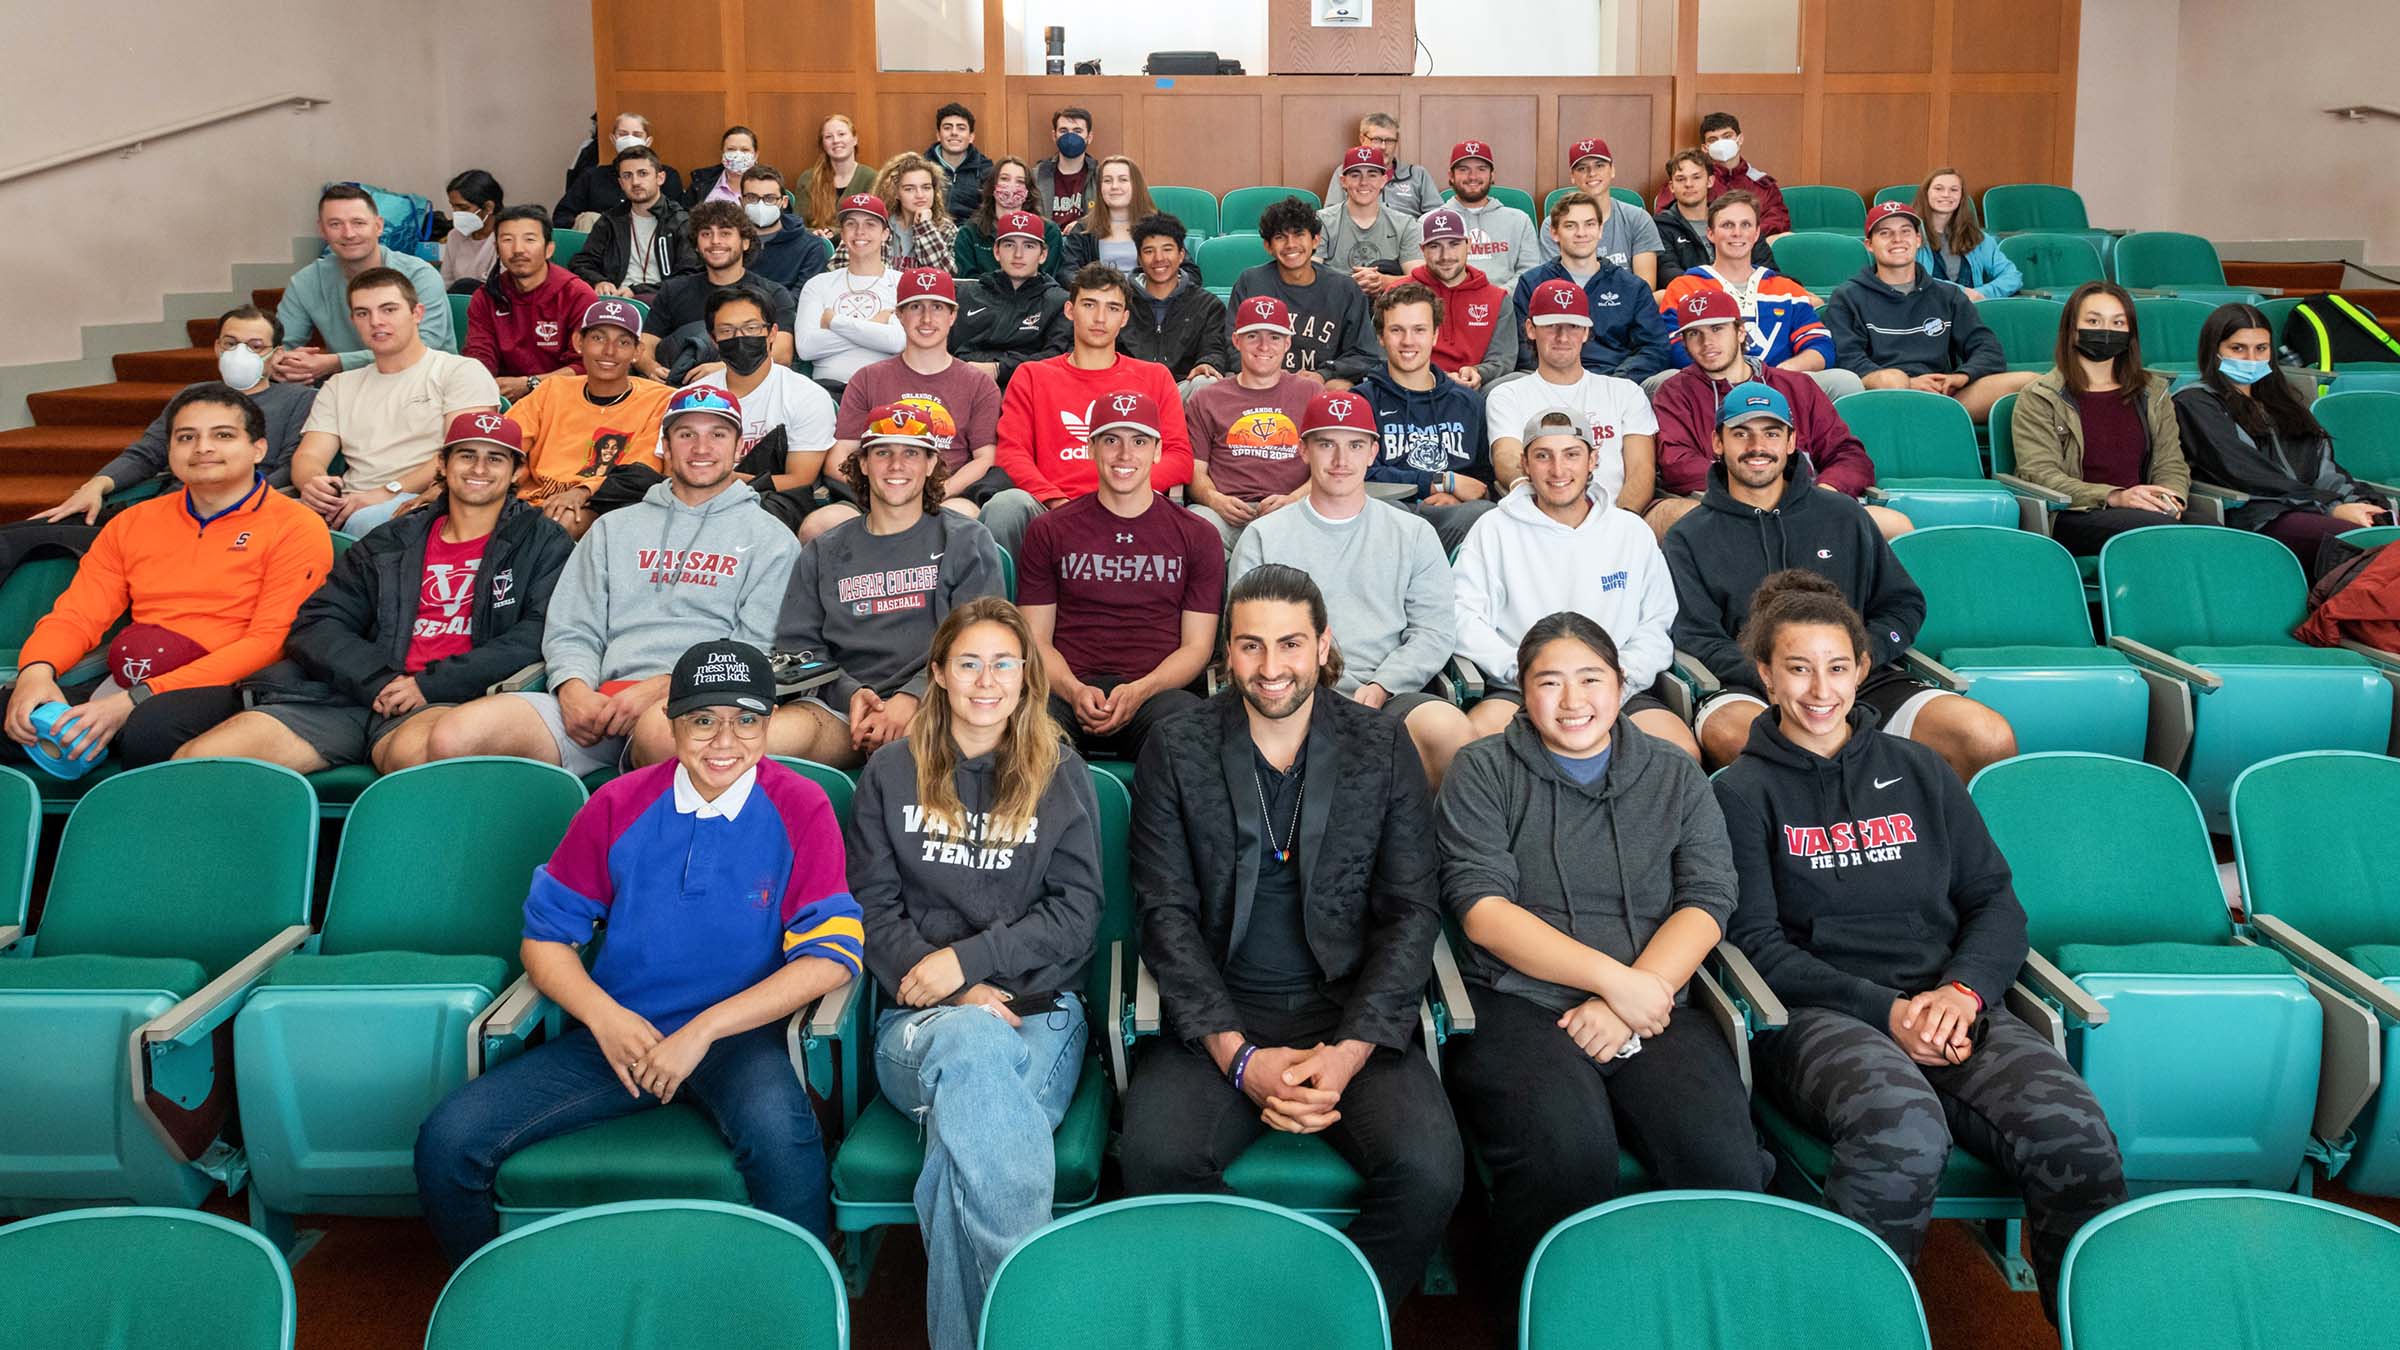 Bryan Ruby ’19 (center, front row) addressed more than 75 students, faculty and staff, including members of the baseball team.